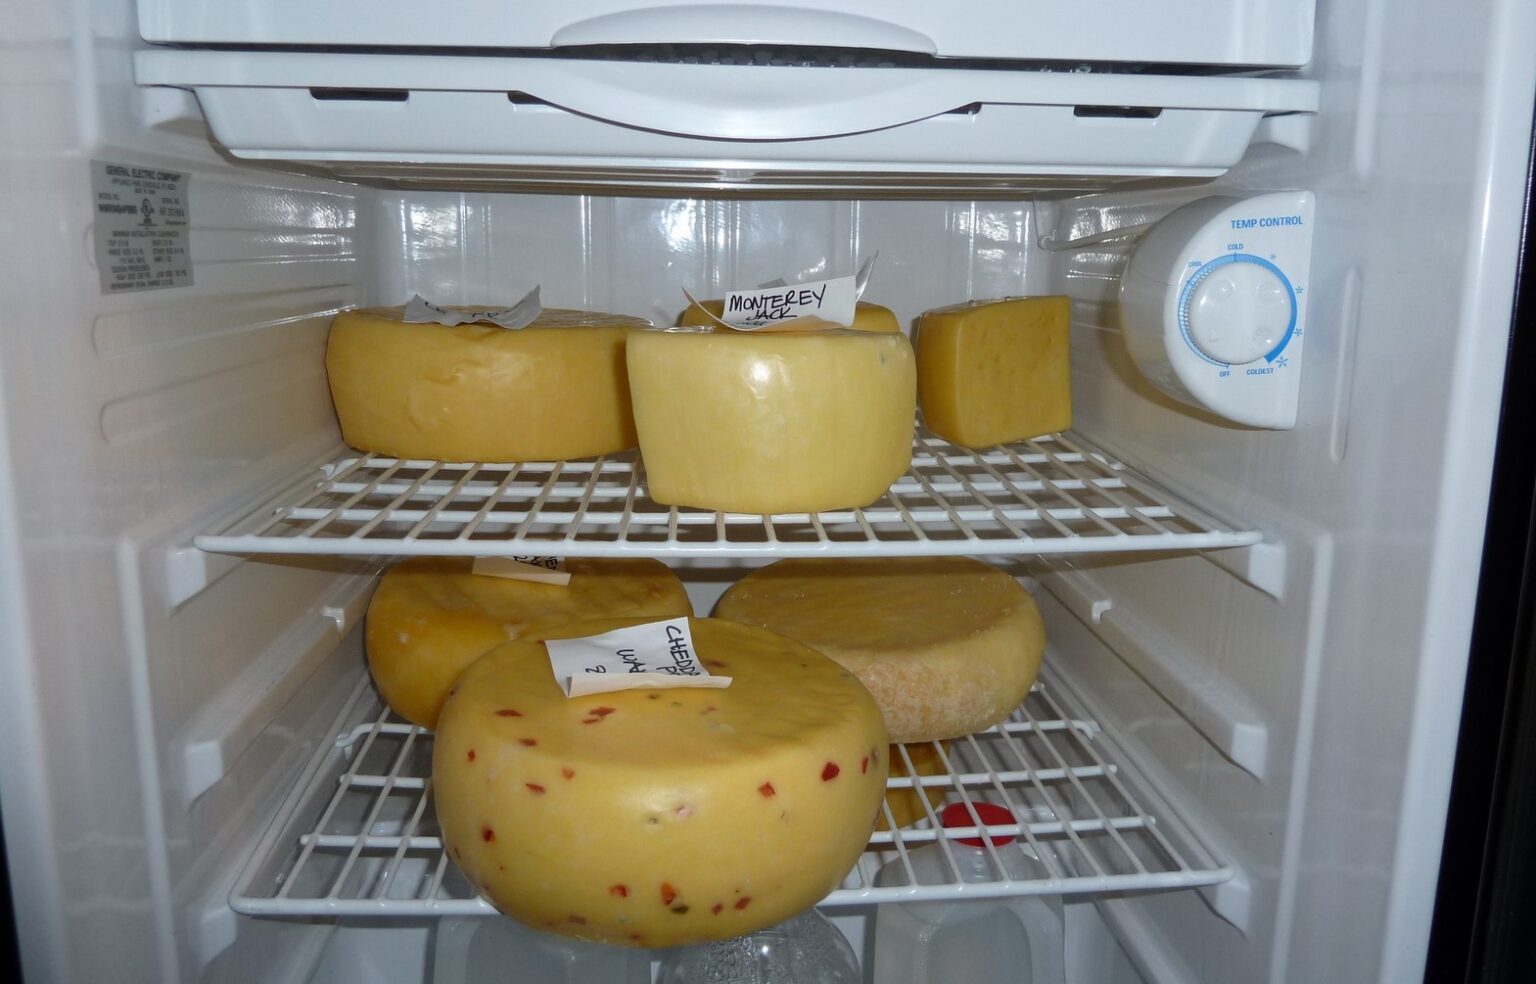 How To Store Cheese In Refrigerator